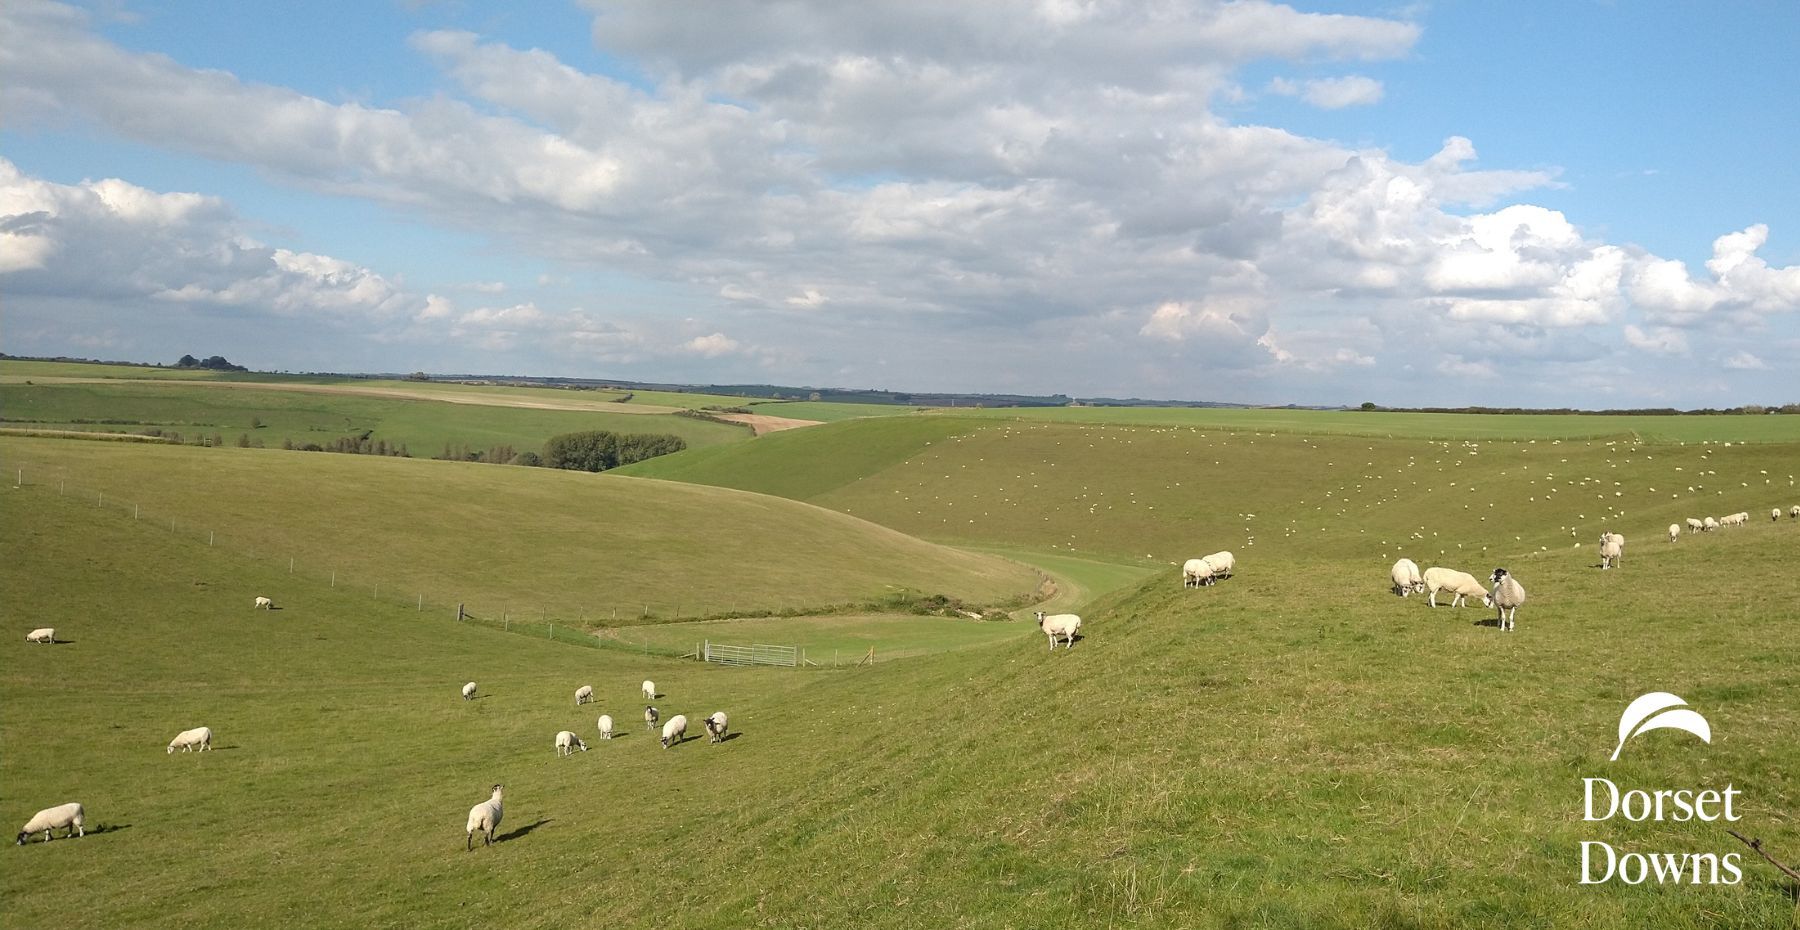 Rolling hills with sheep grazing them, which the Dorset Downs natural burial ground overlooks